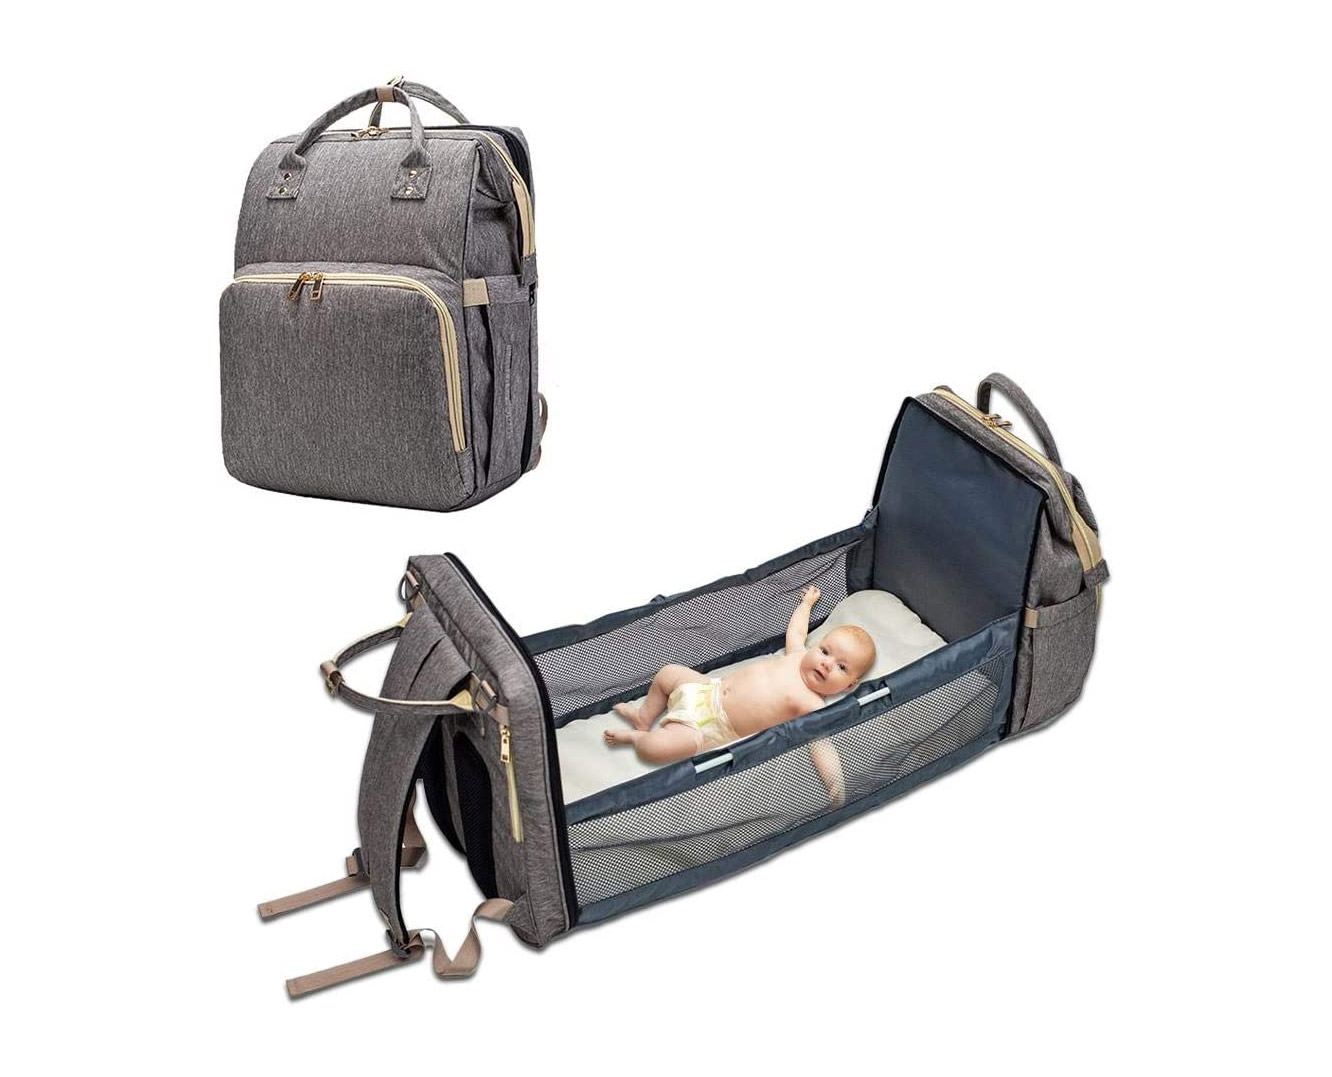 3-in-1 Diaper Bag With Built-in Changing Station/Bassinet